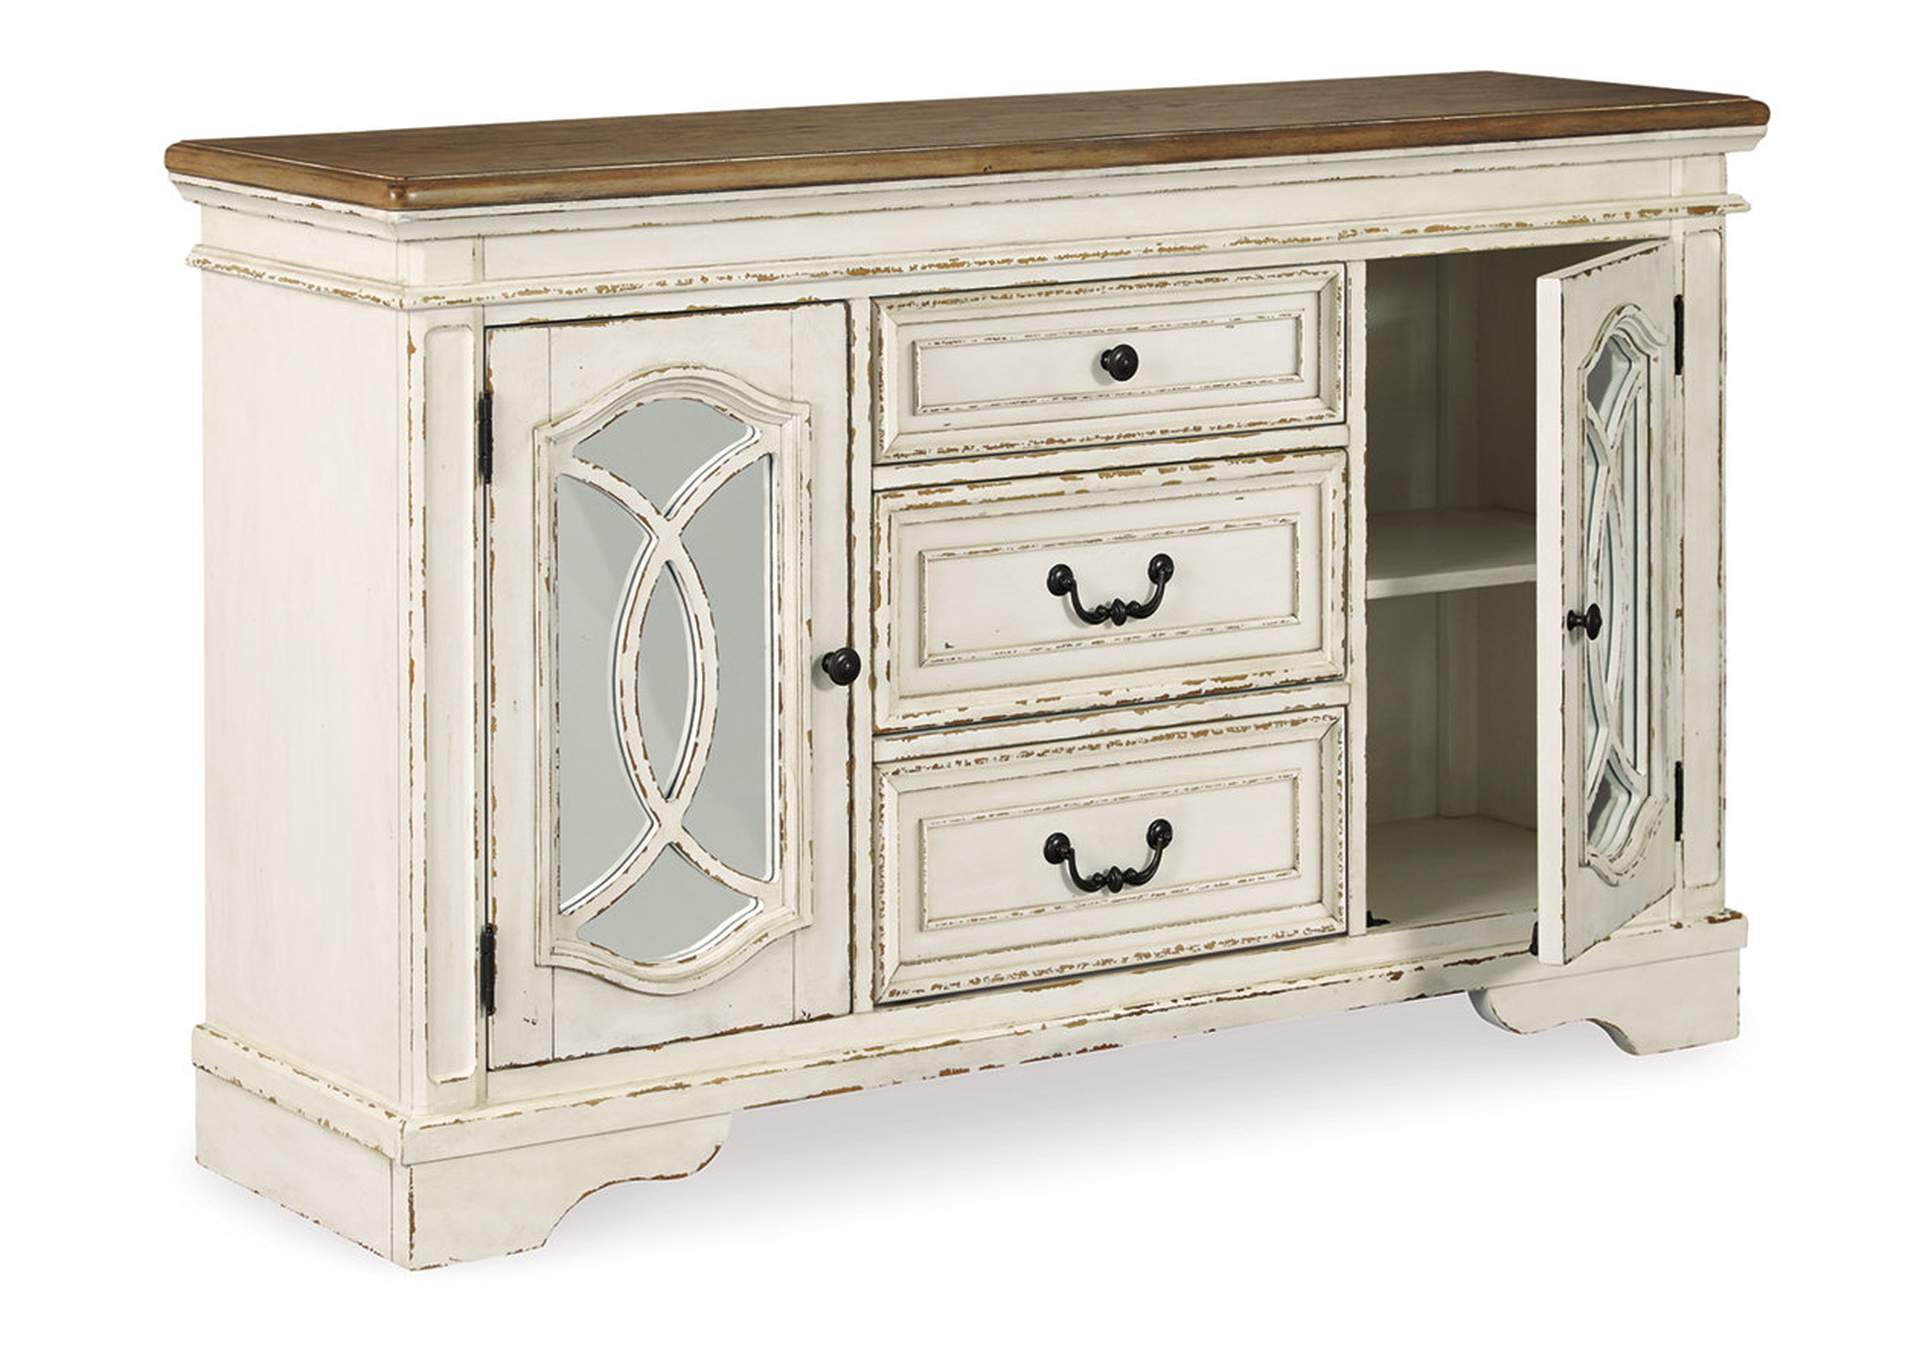 Realyn Dining Server,Signature Design By Ashley